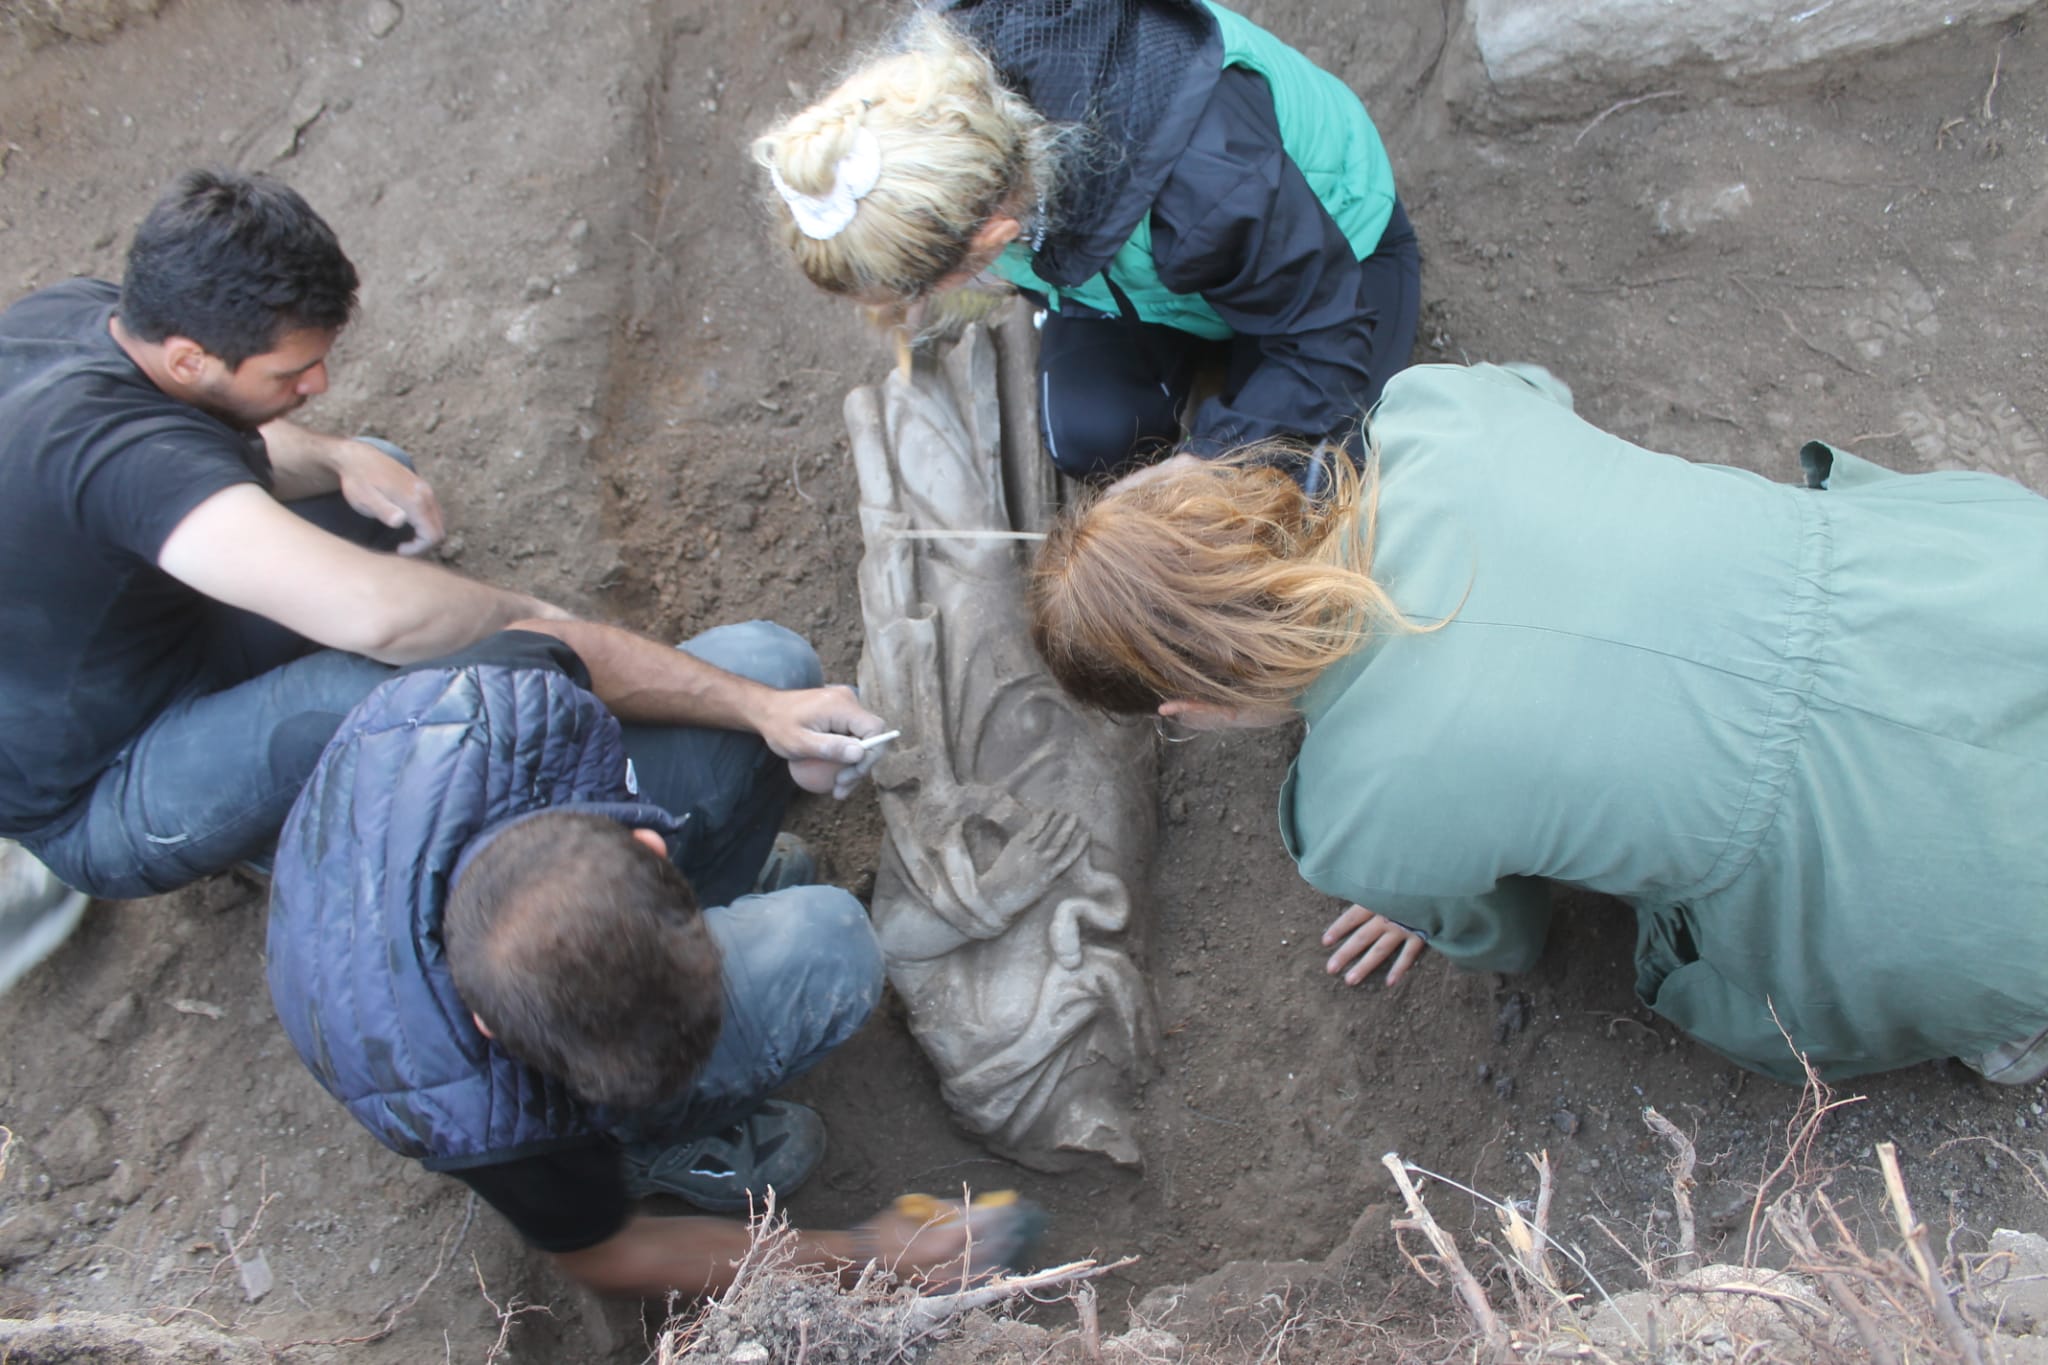 Ancient statue of the mythological goddess Hygieia unearthed in Turkey